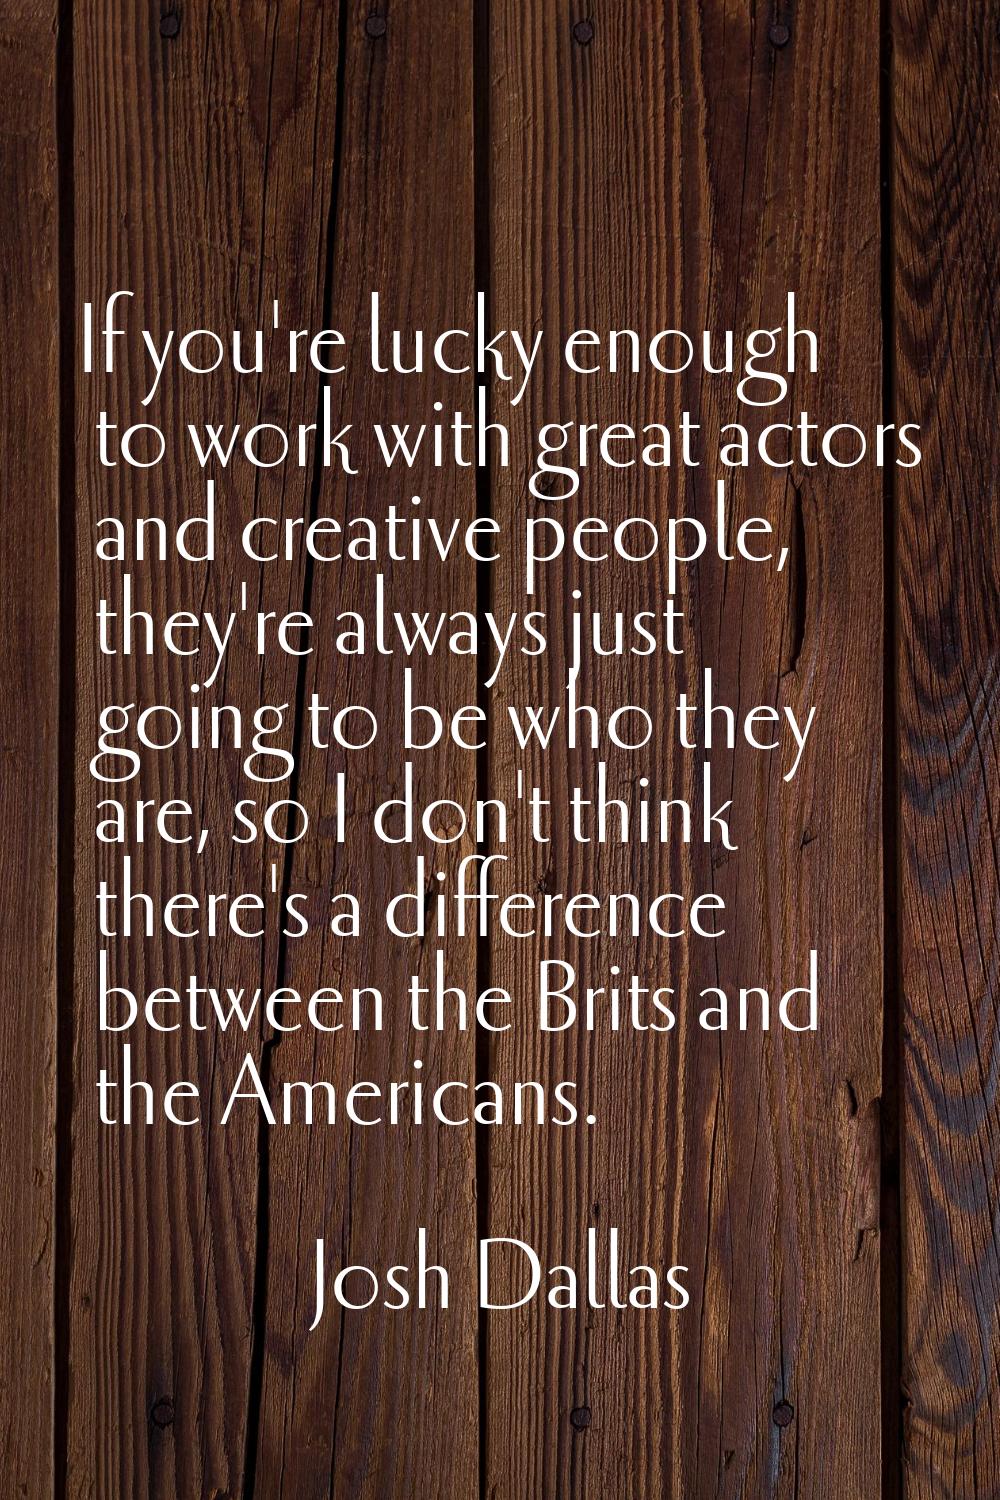 If you're lucky enough to work with great actors and creative people, they're always just going to 